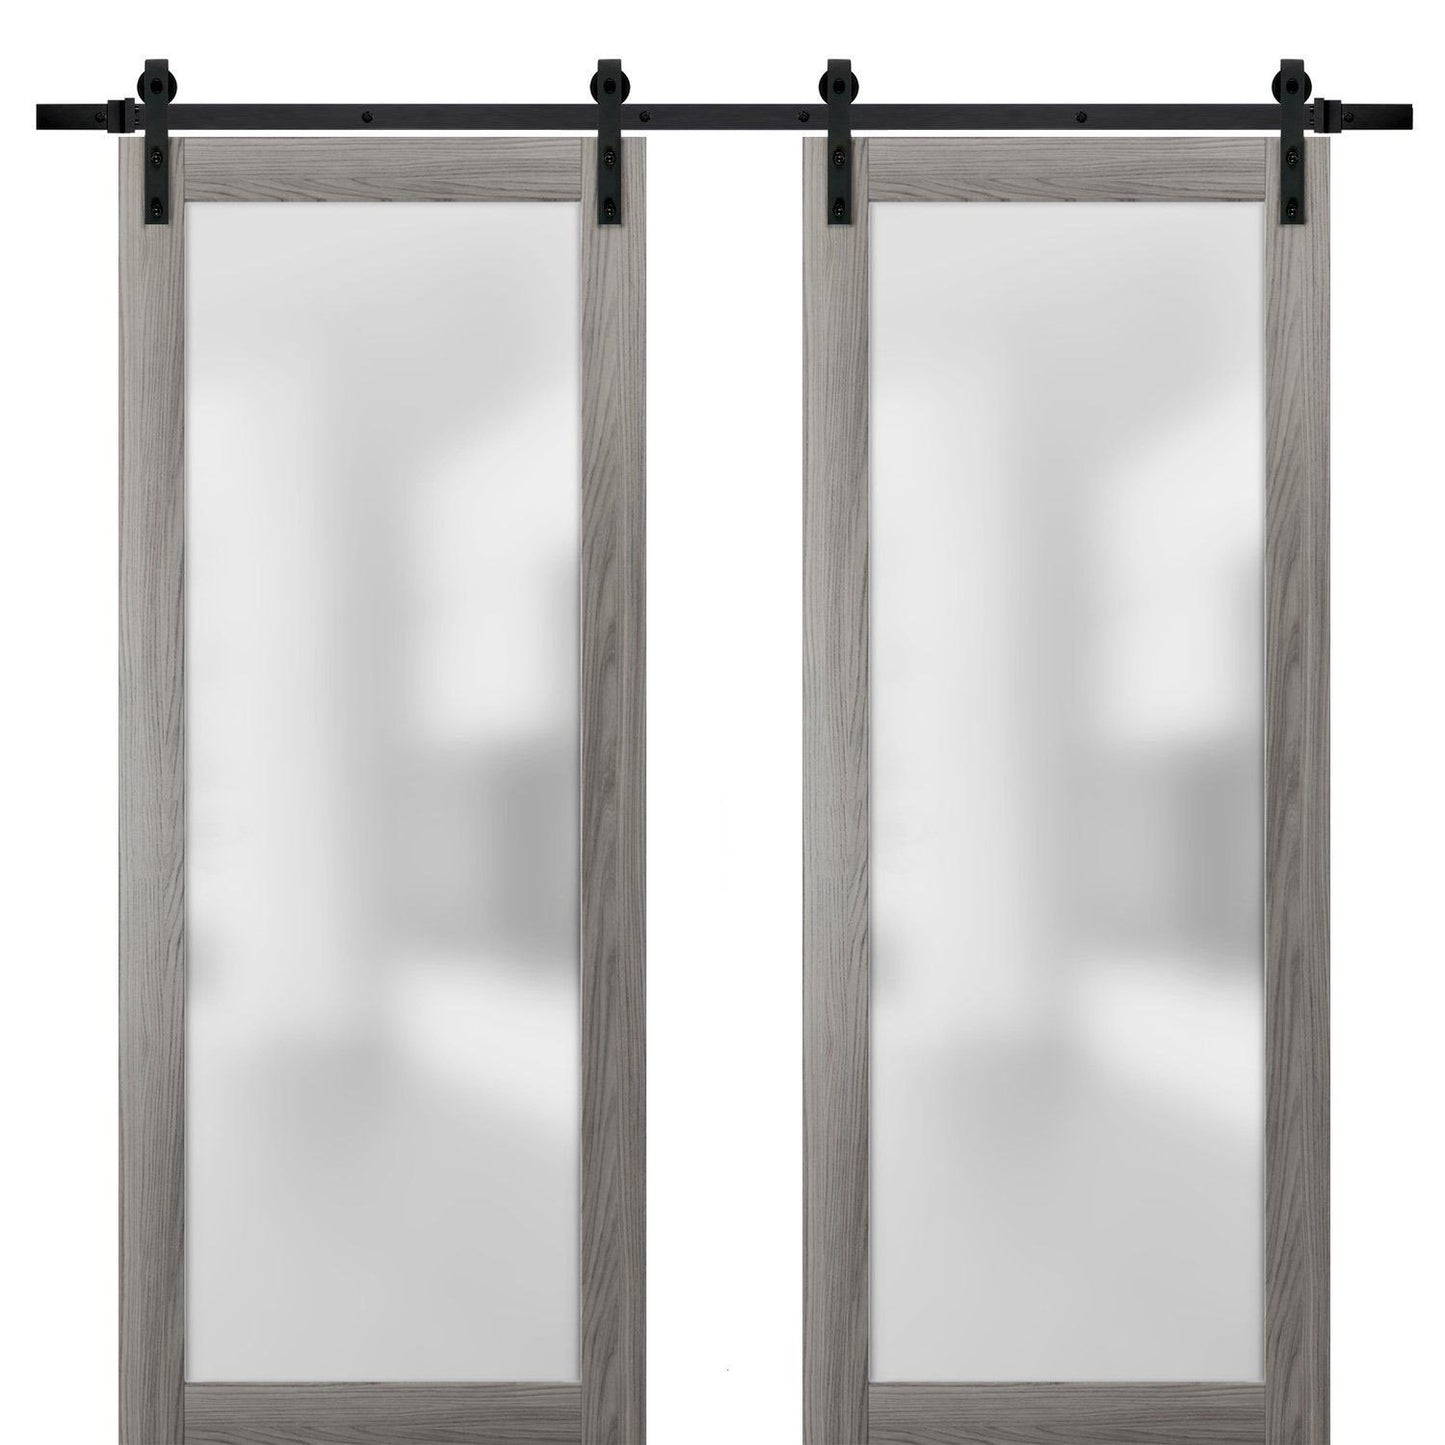 Planum 2102 Ginger Ash Double Barn Door with Frosted Glass | Black Rail